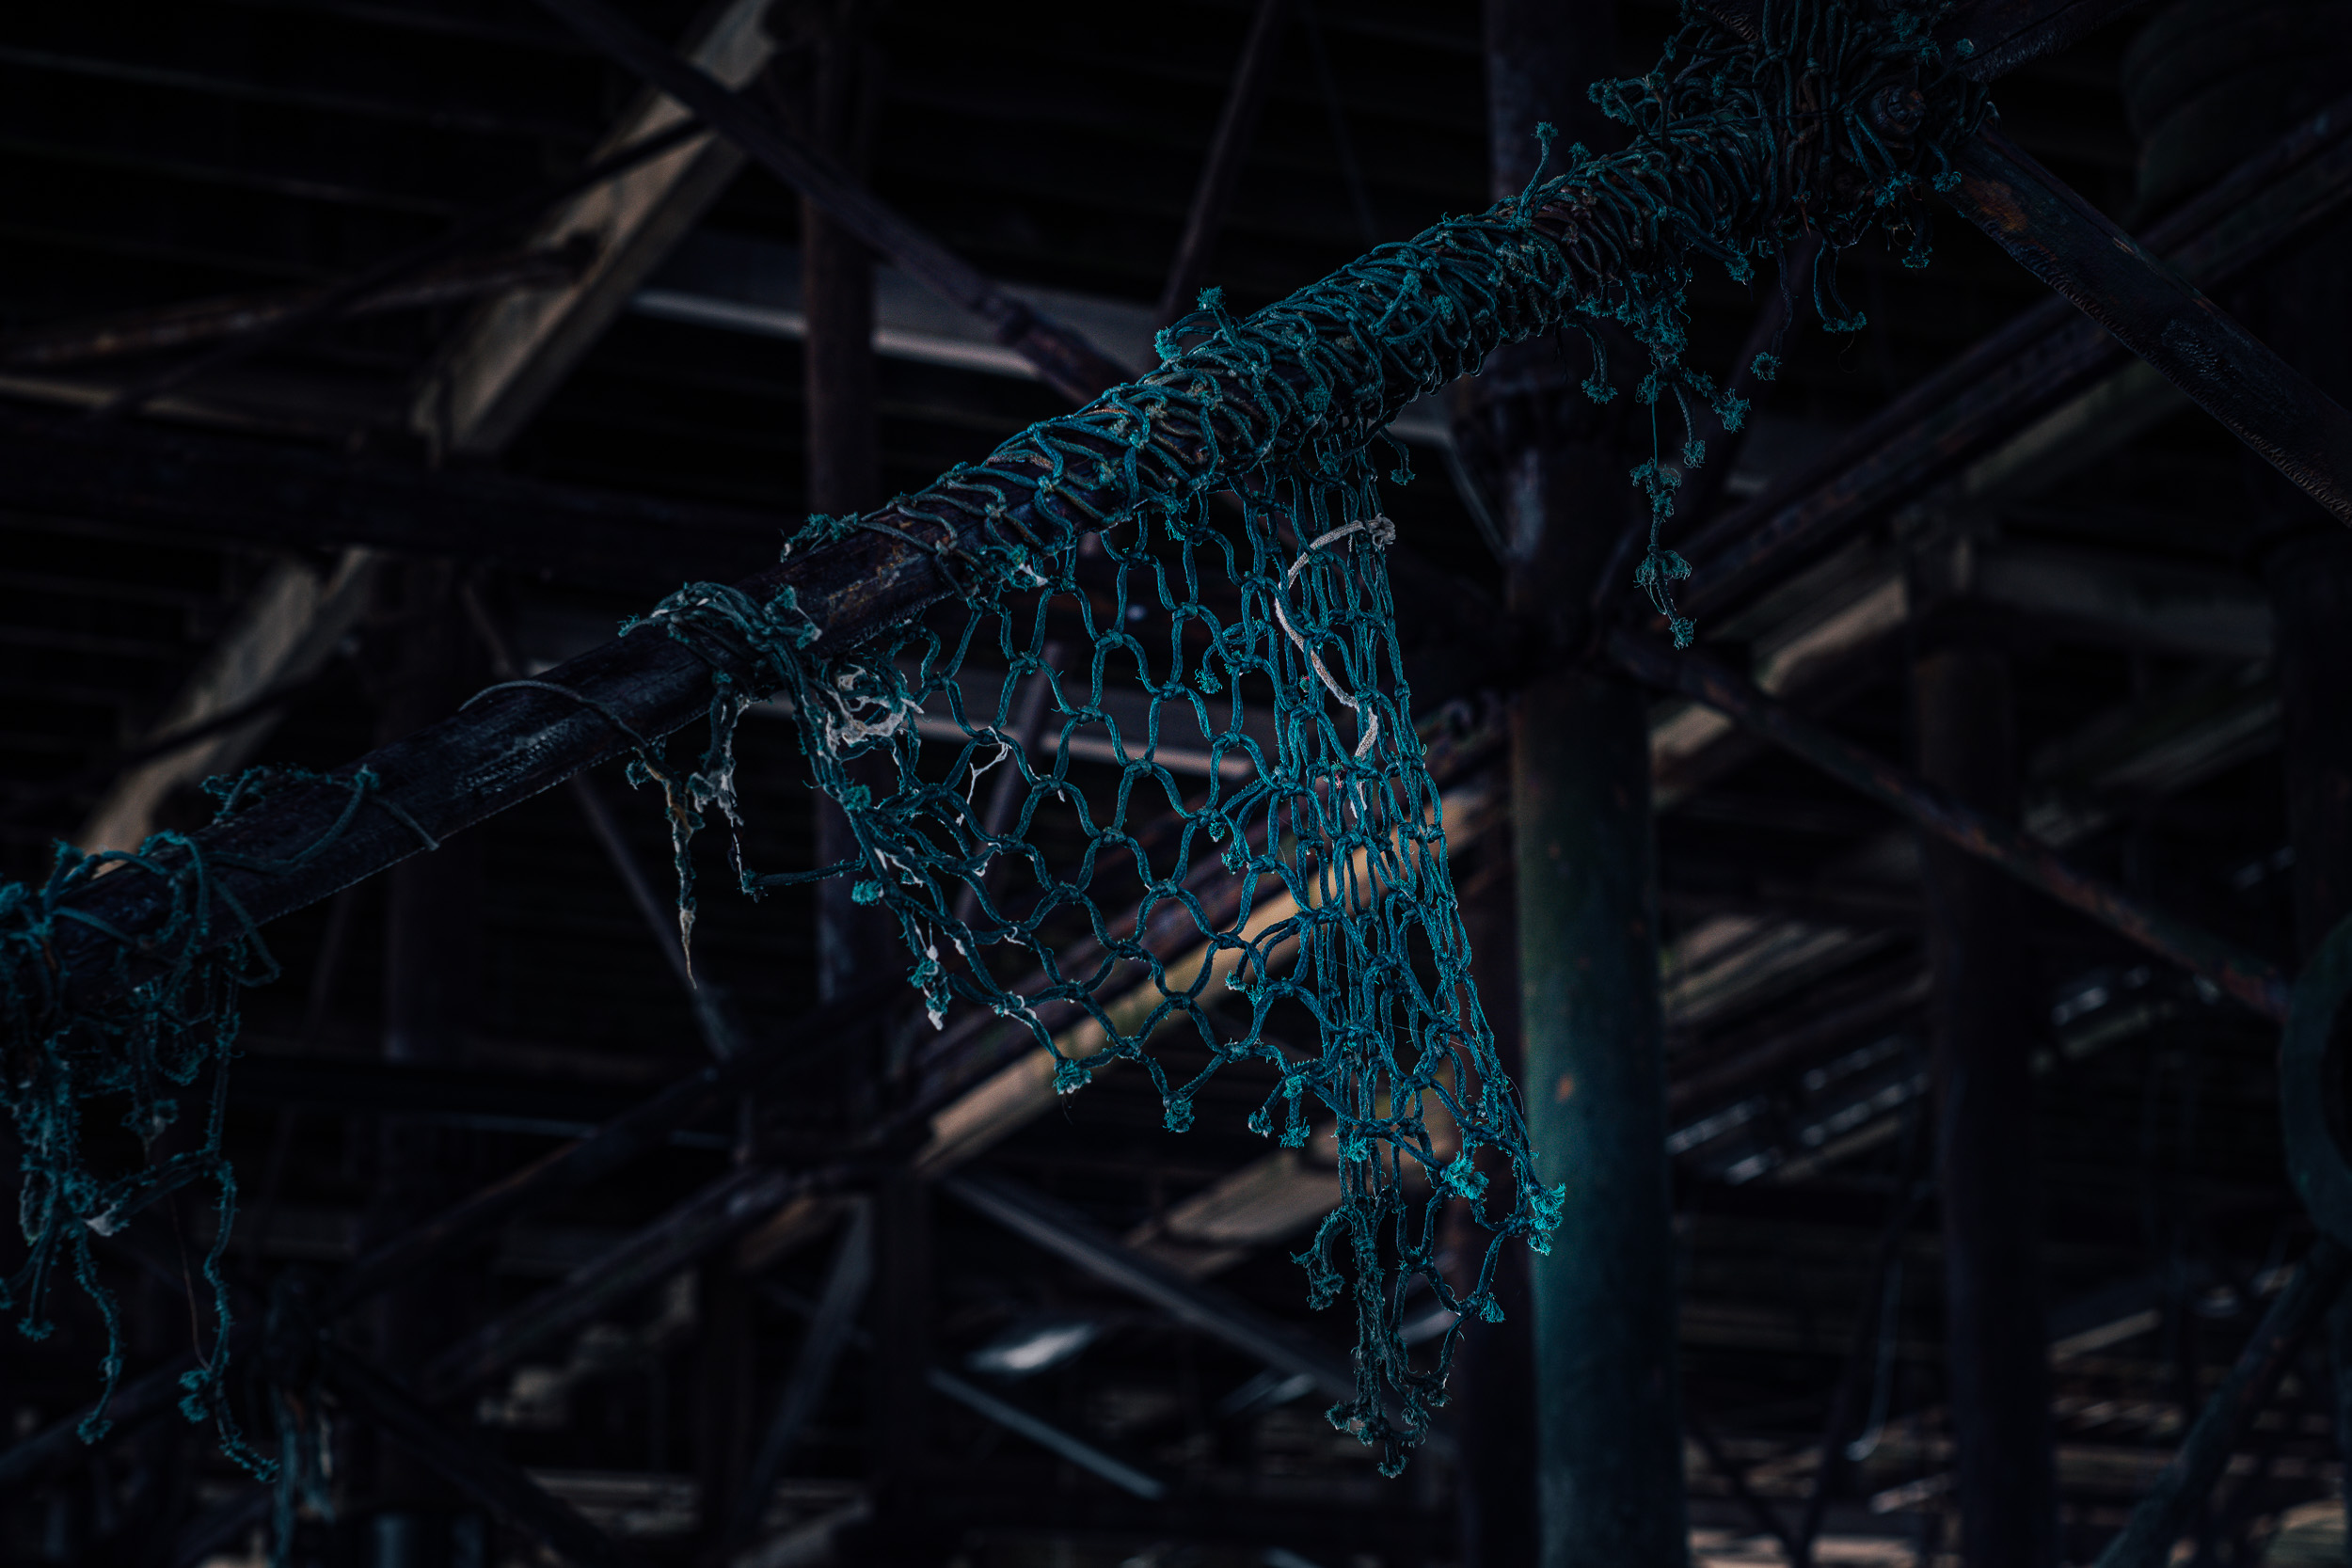 Washed-up, abandoned fishing net attached to a rusted wrought iron railing. 